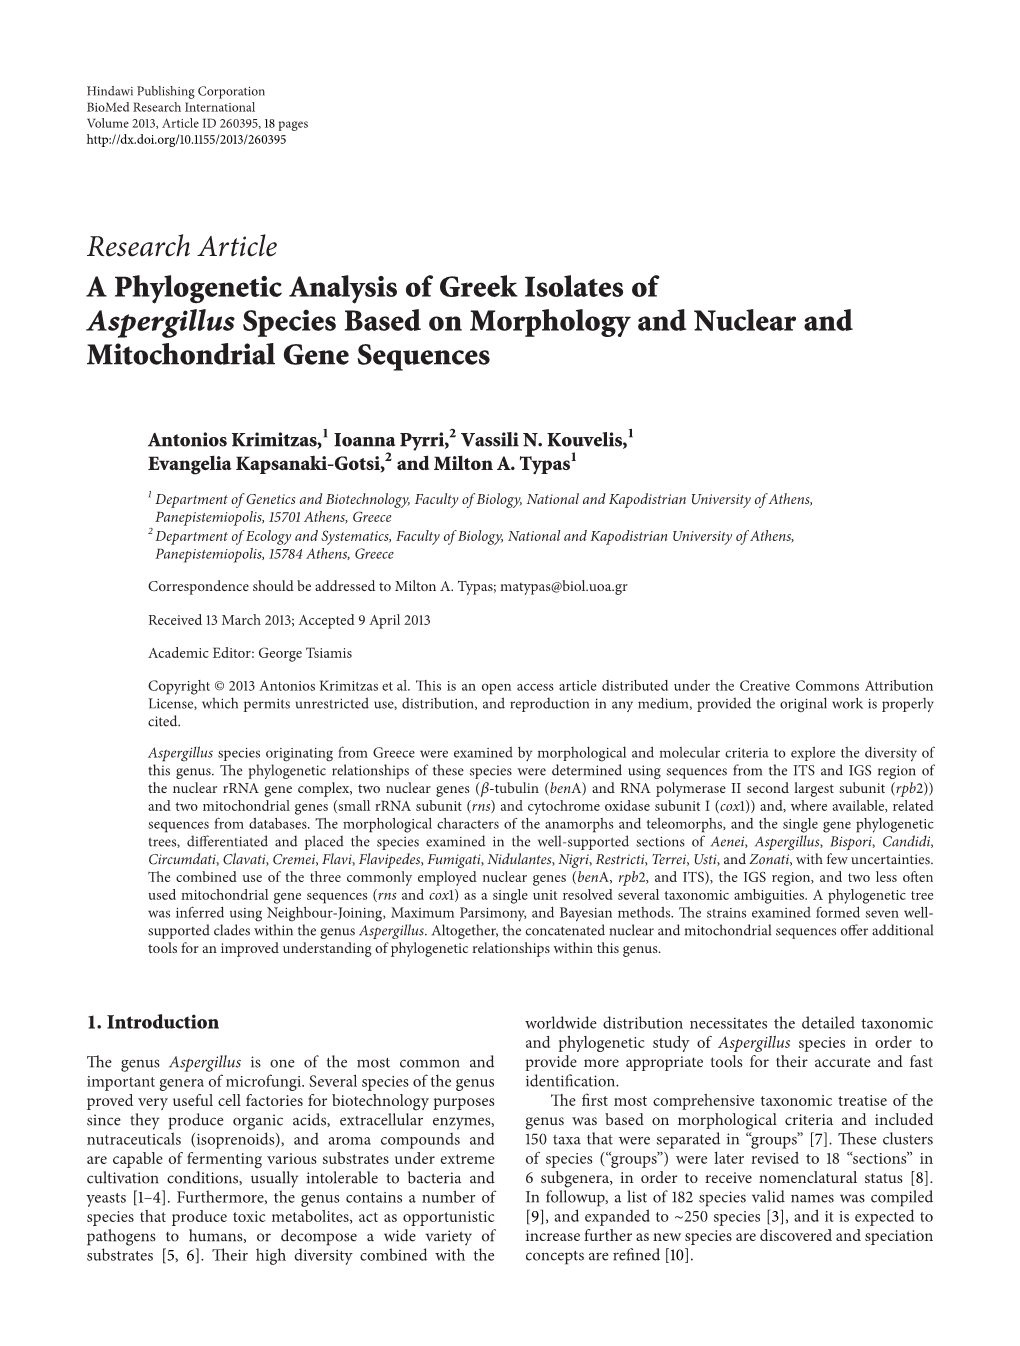 A Phylogenetic Analysis of Greek Isolates of Aspergillus Species Based on Morphology and Nuclear and Mitochondrial Gene Sequences